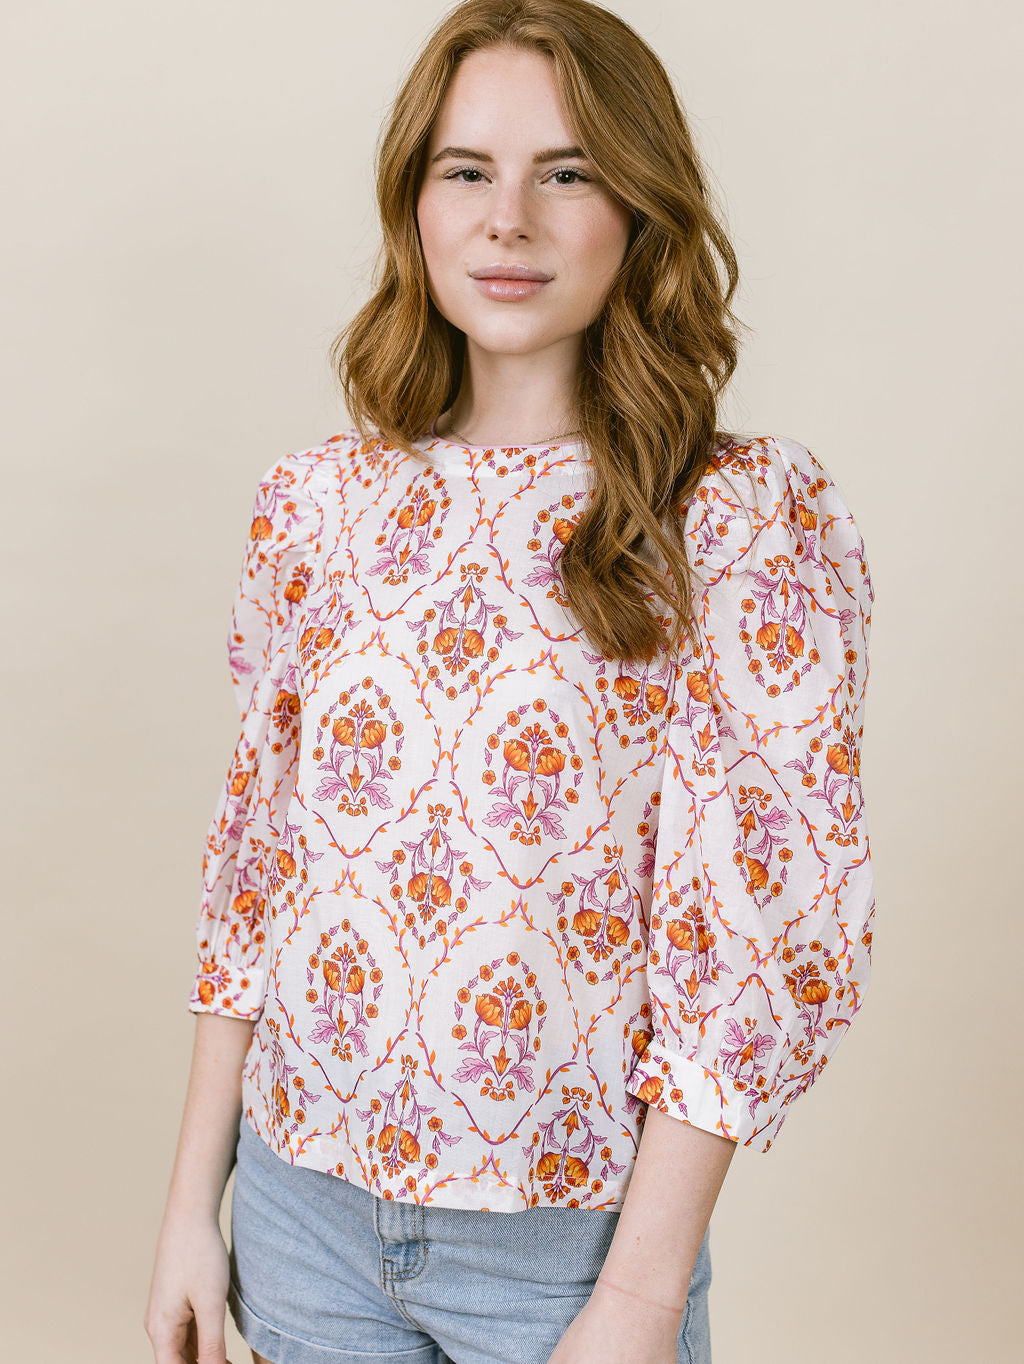 DARBY TOP - CALICO PINK